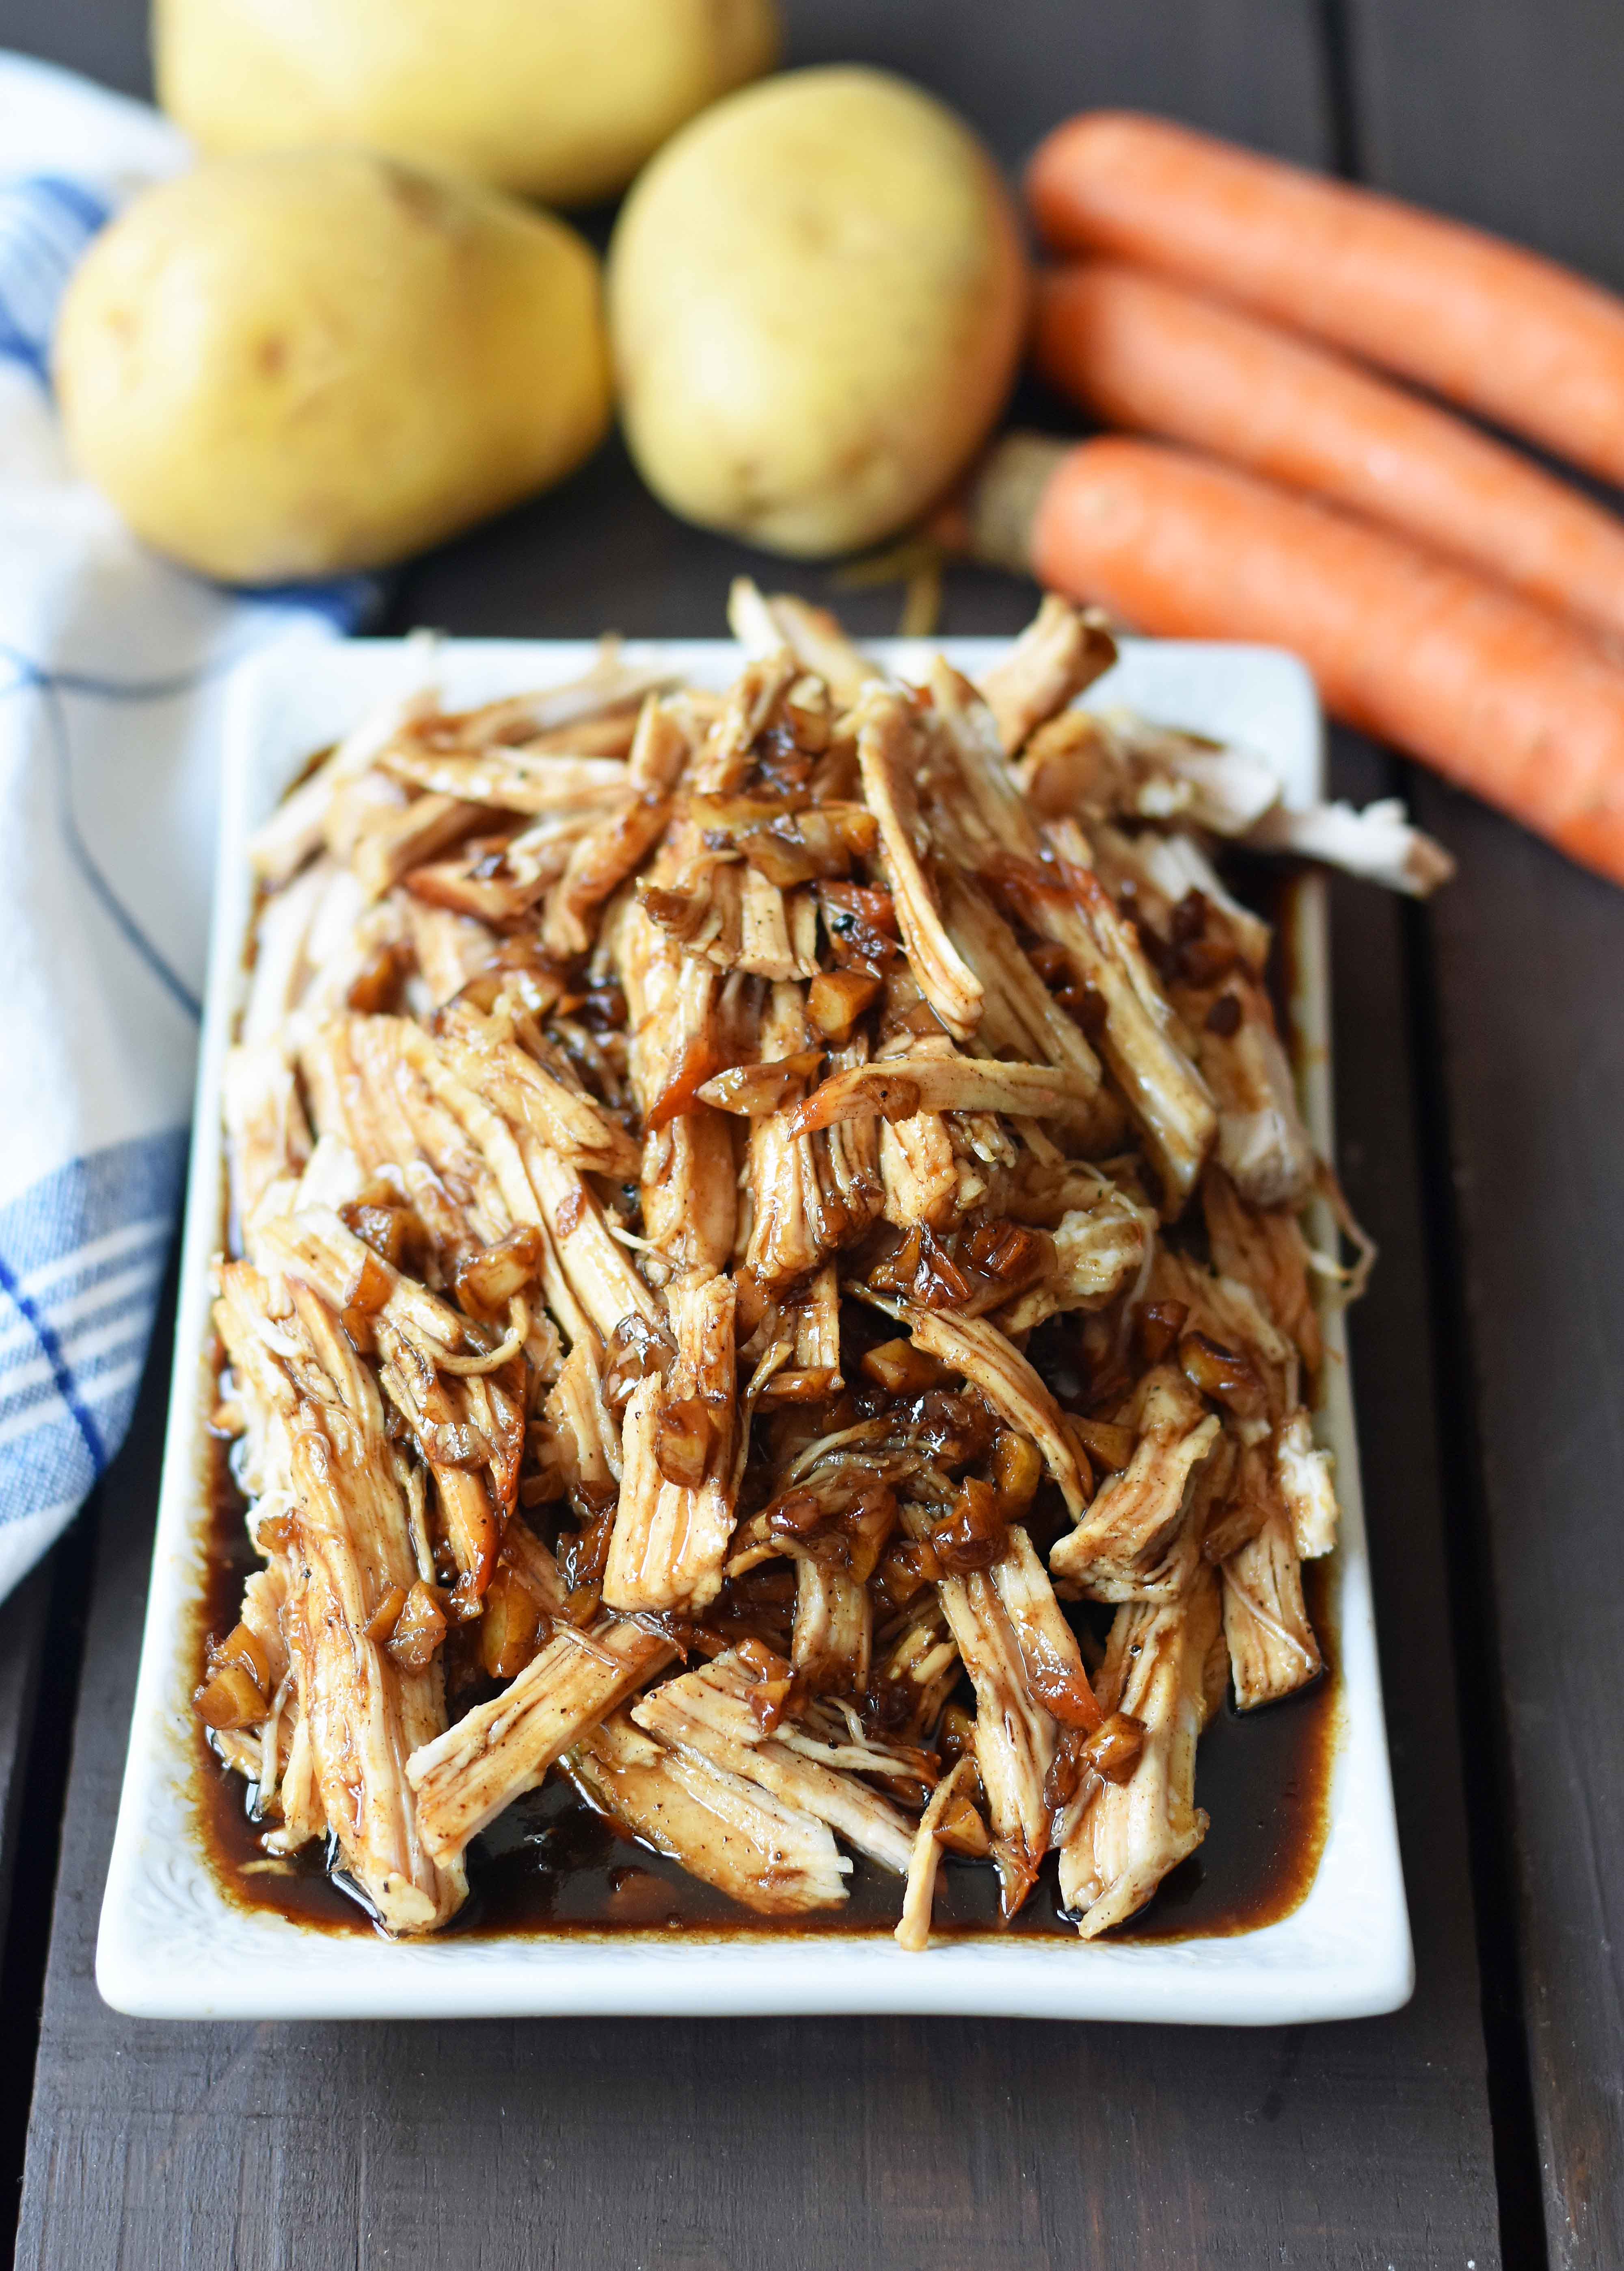 Brown Sugar Balsamic Pork. Tender lean pork loin slow cooked in a brown sugar garlic balsamic glaze. An easy flavorful meal made in a slow cooker or instant pot. www.modernhoney.com